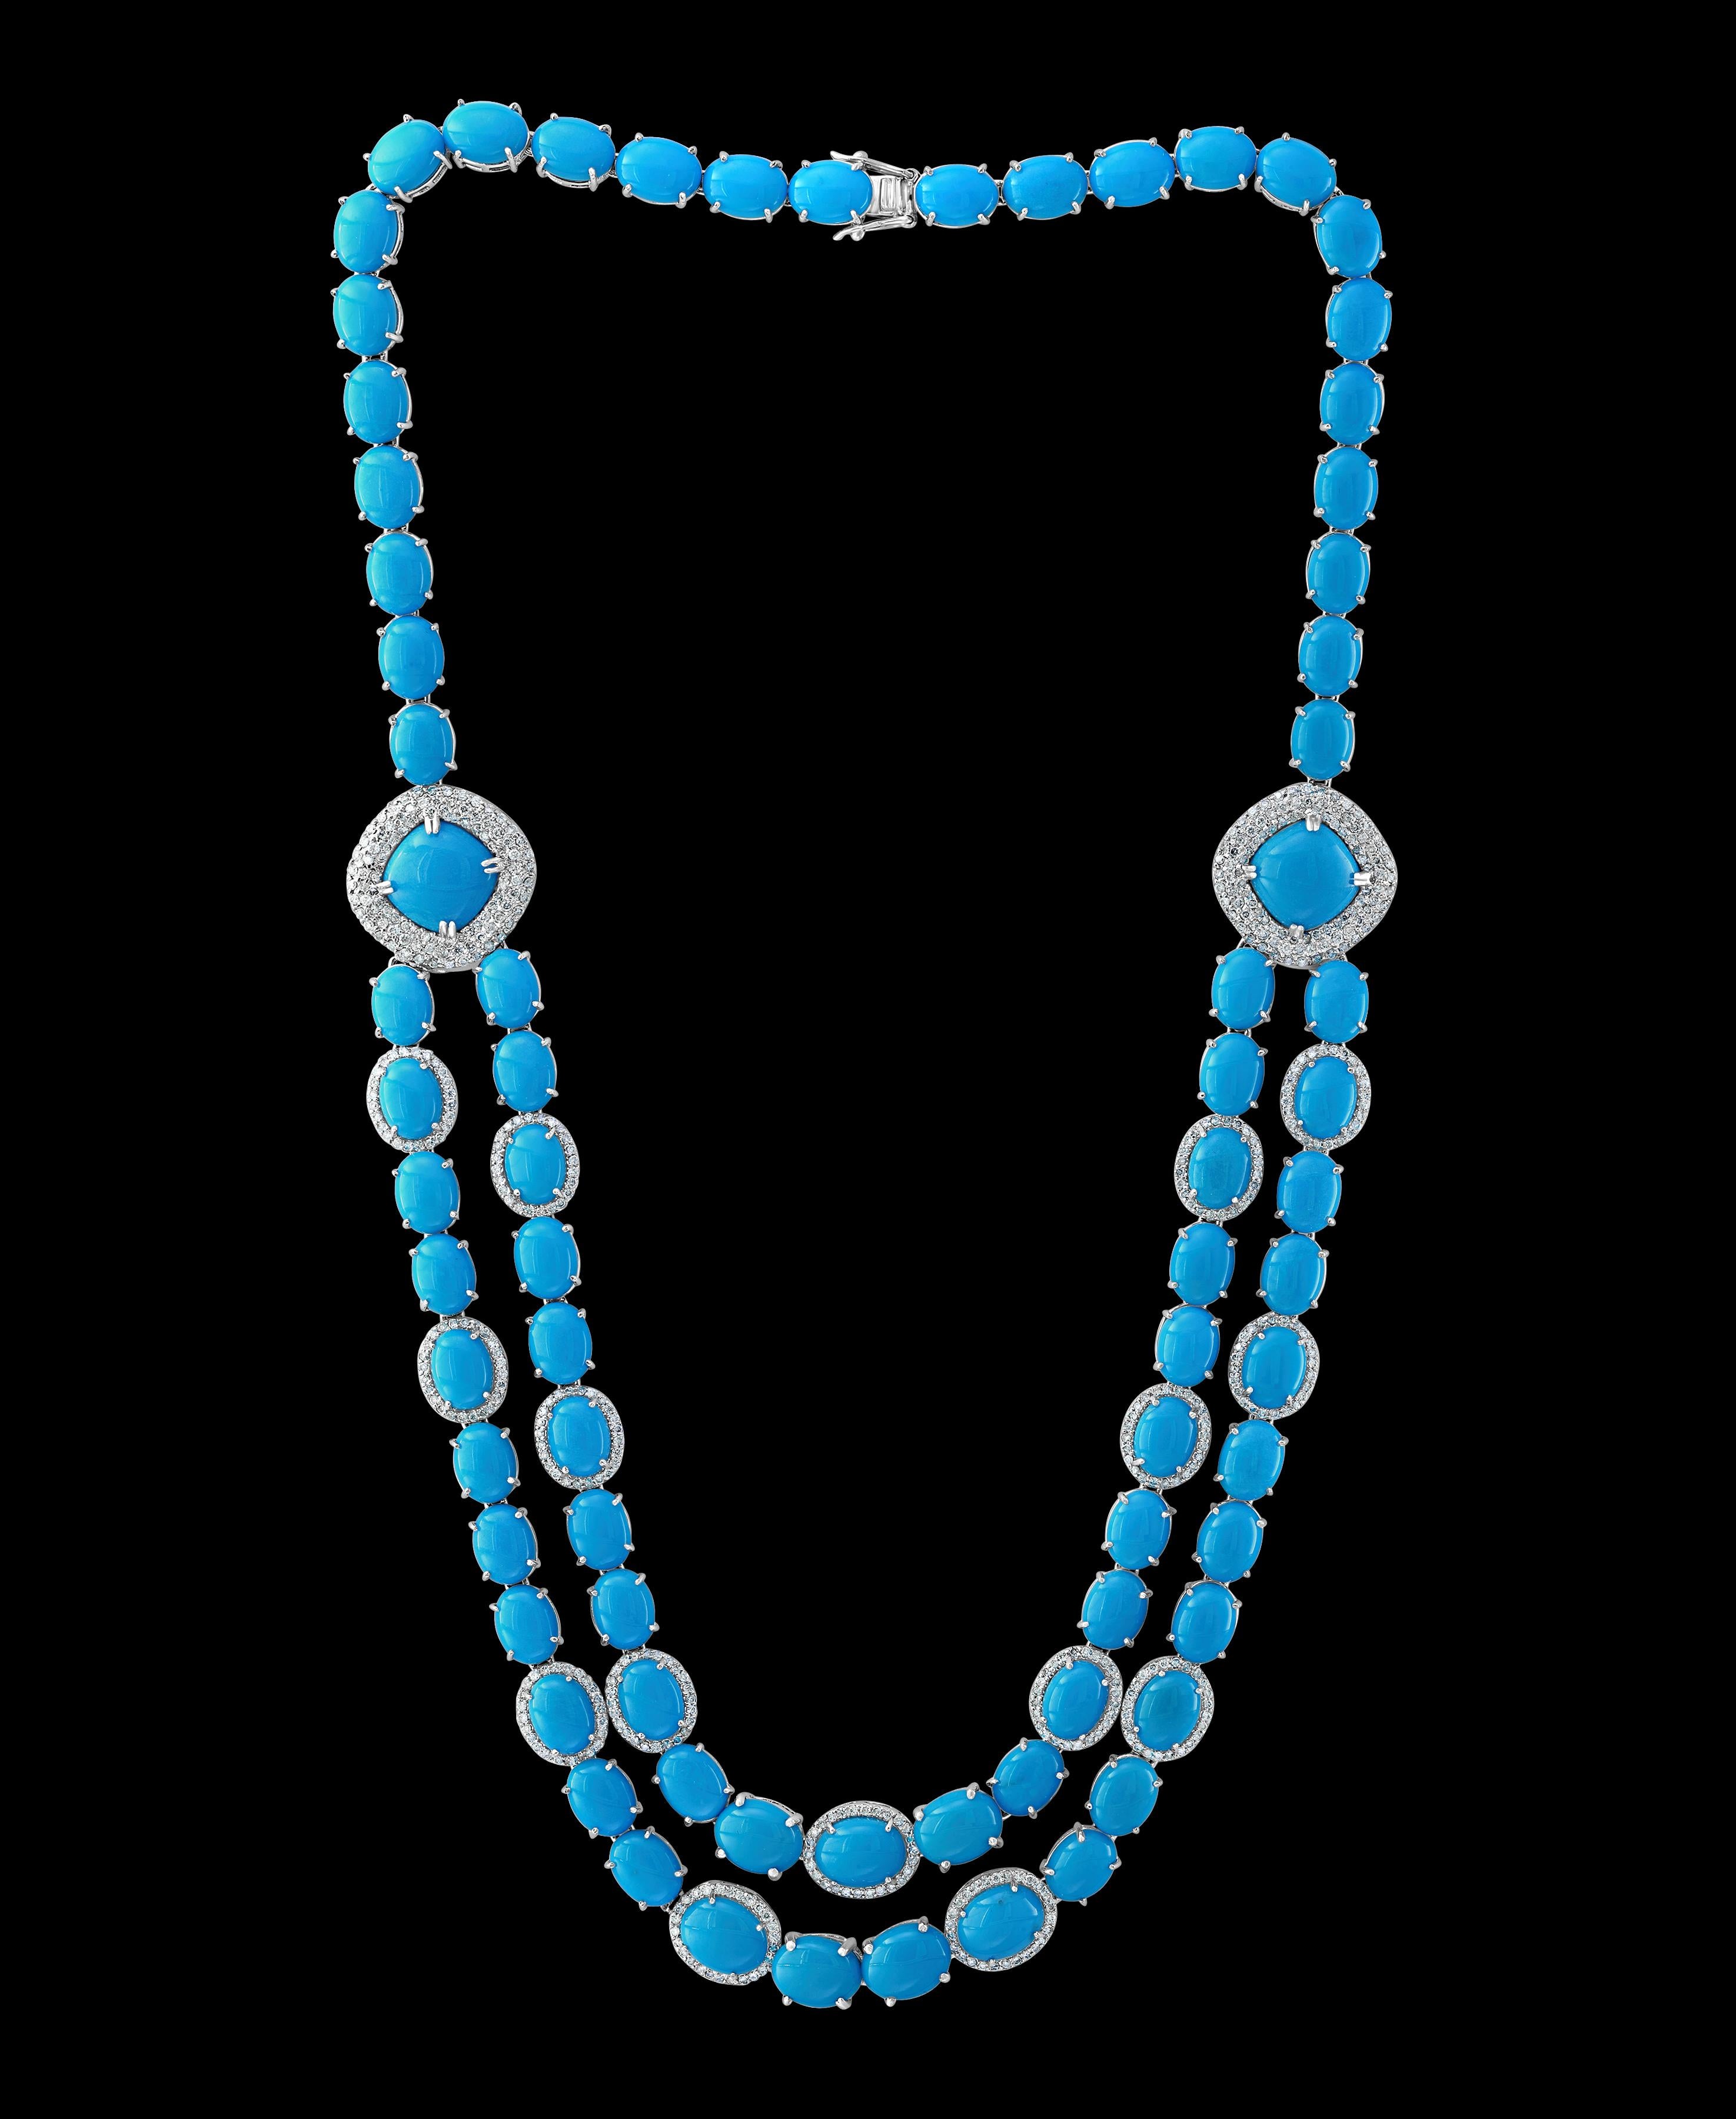 Oval Cut 104 Carat Sleeping Beauty Turquoise Necklace and Earring Set, Bridal, 18 K Gold For Sale